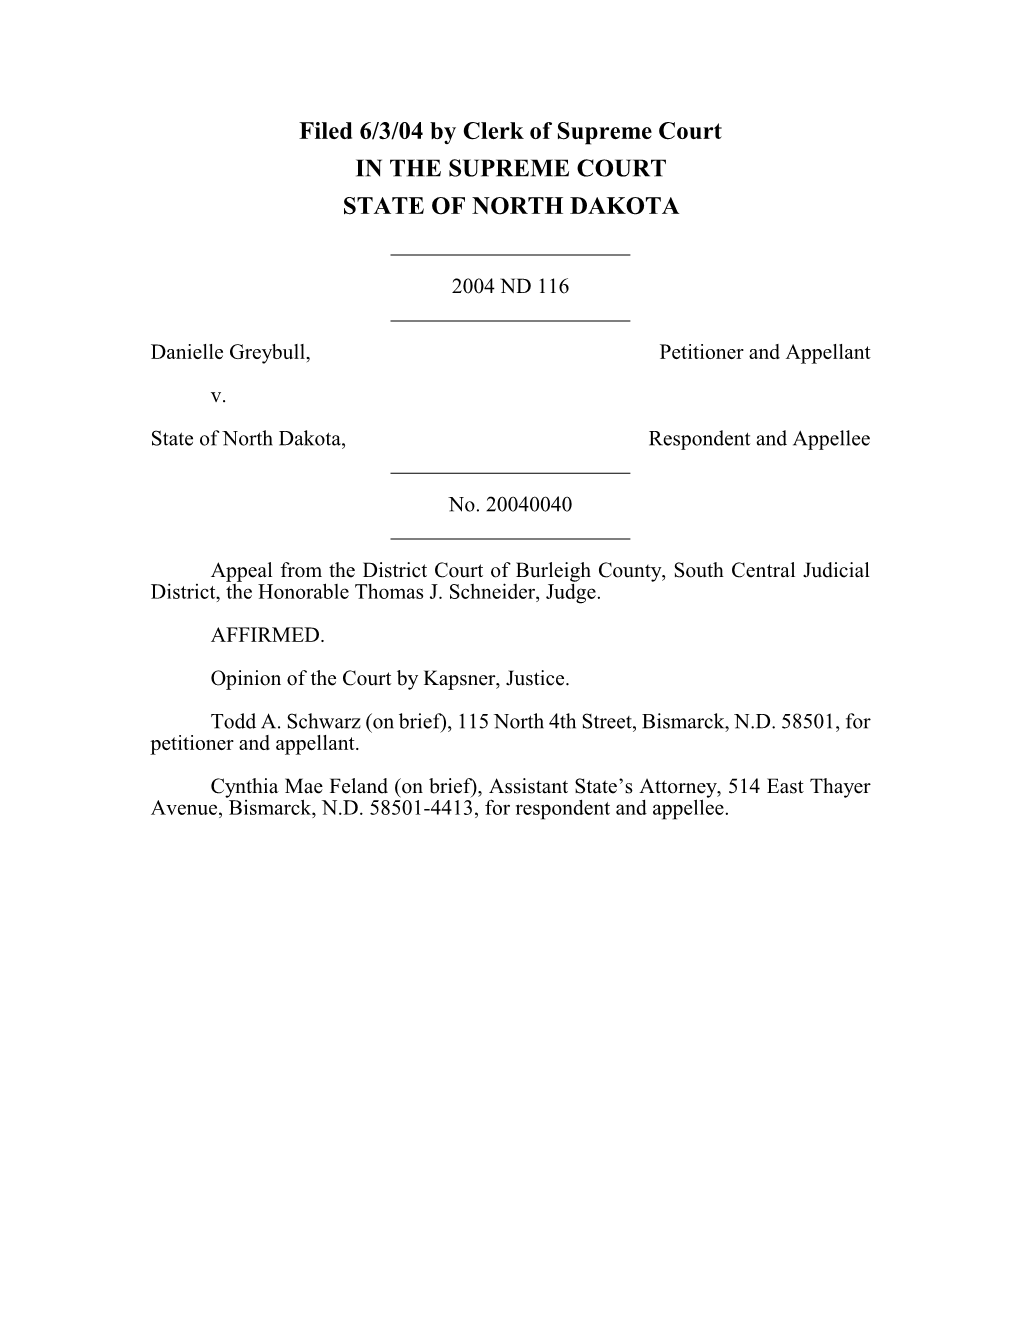 Filed 6/3/04 by Clerk of Supreme Court in the SUPREME COURT STATE of NORTH DAKOTA